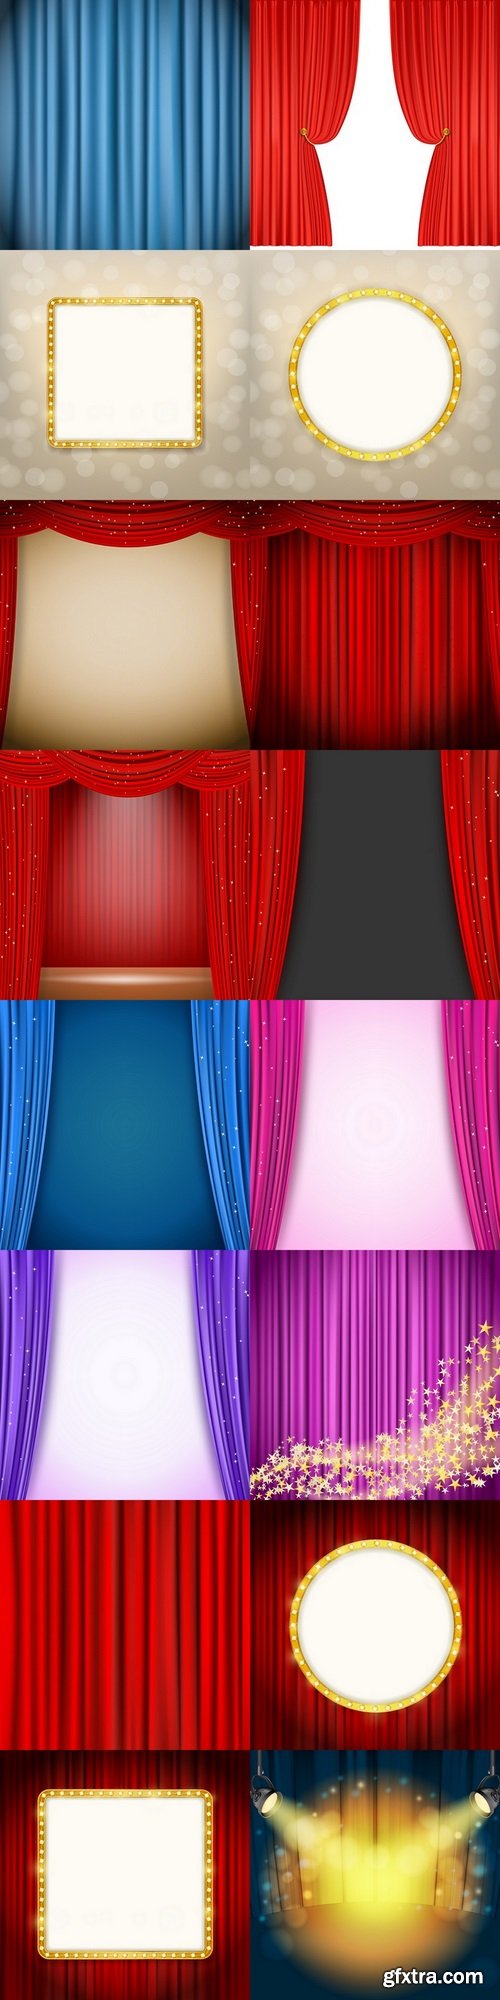 Оpen red curtains with glittering stars background